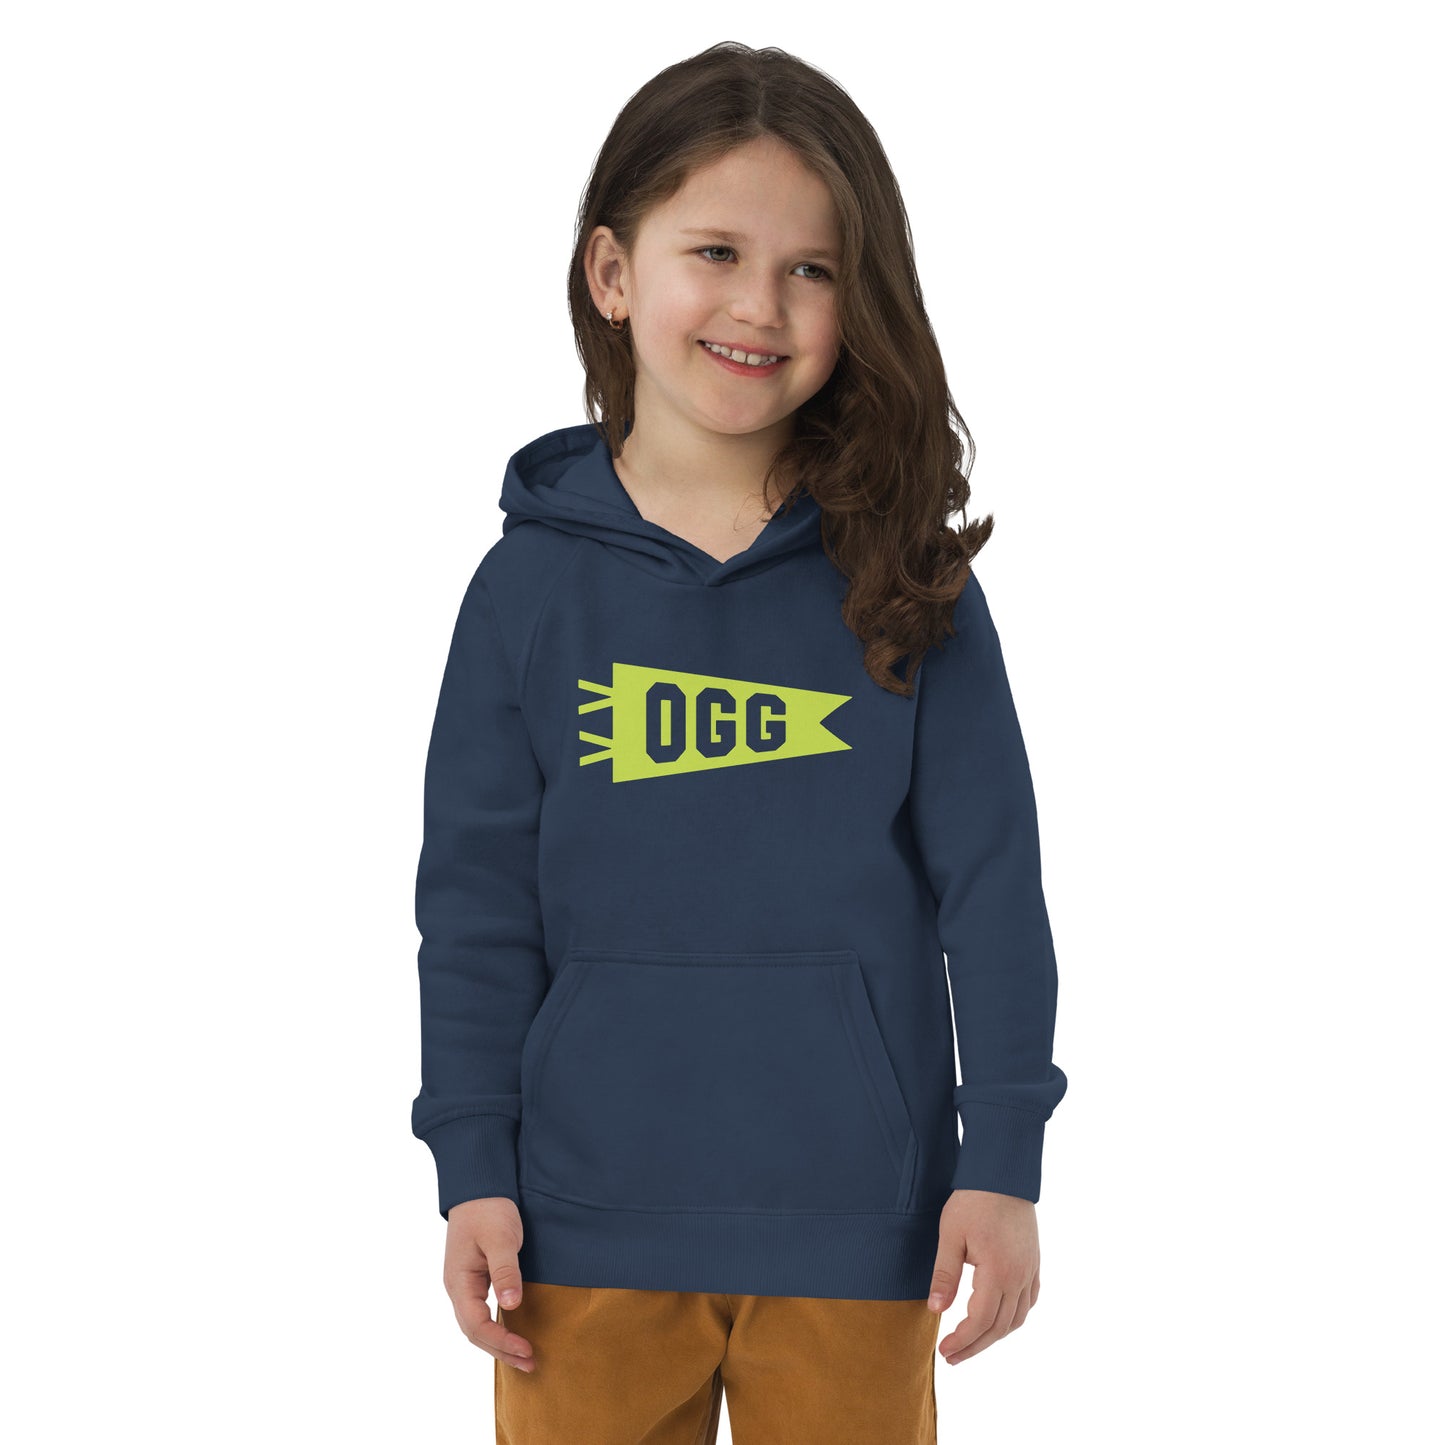 Kid's Sustainable Hoodie - Green Graphic • OGG Maui • YHM Designs - Image 07